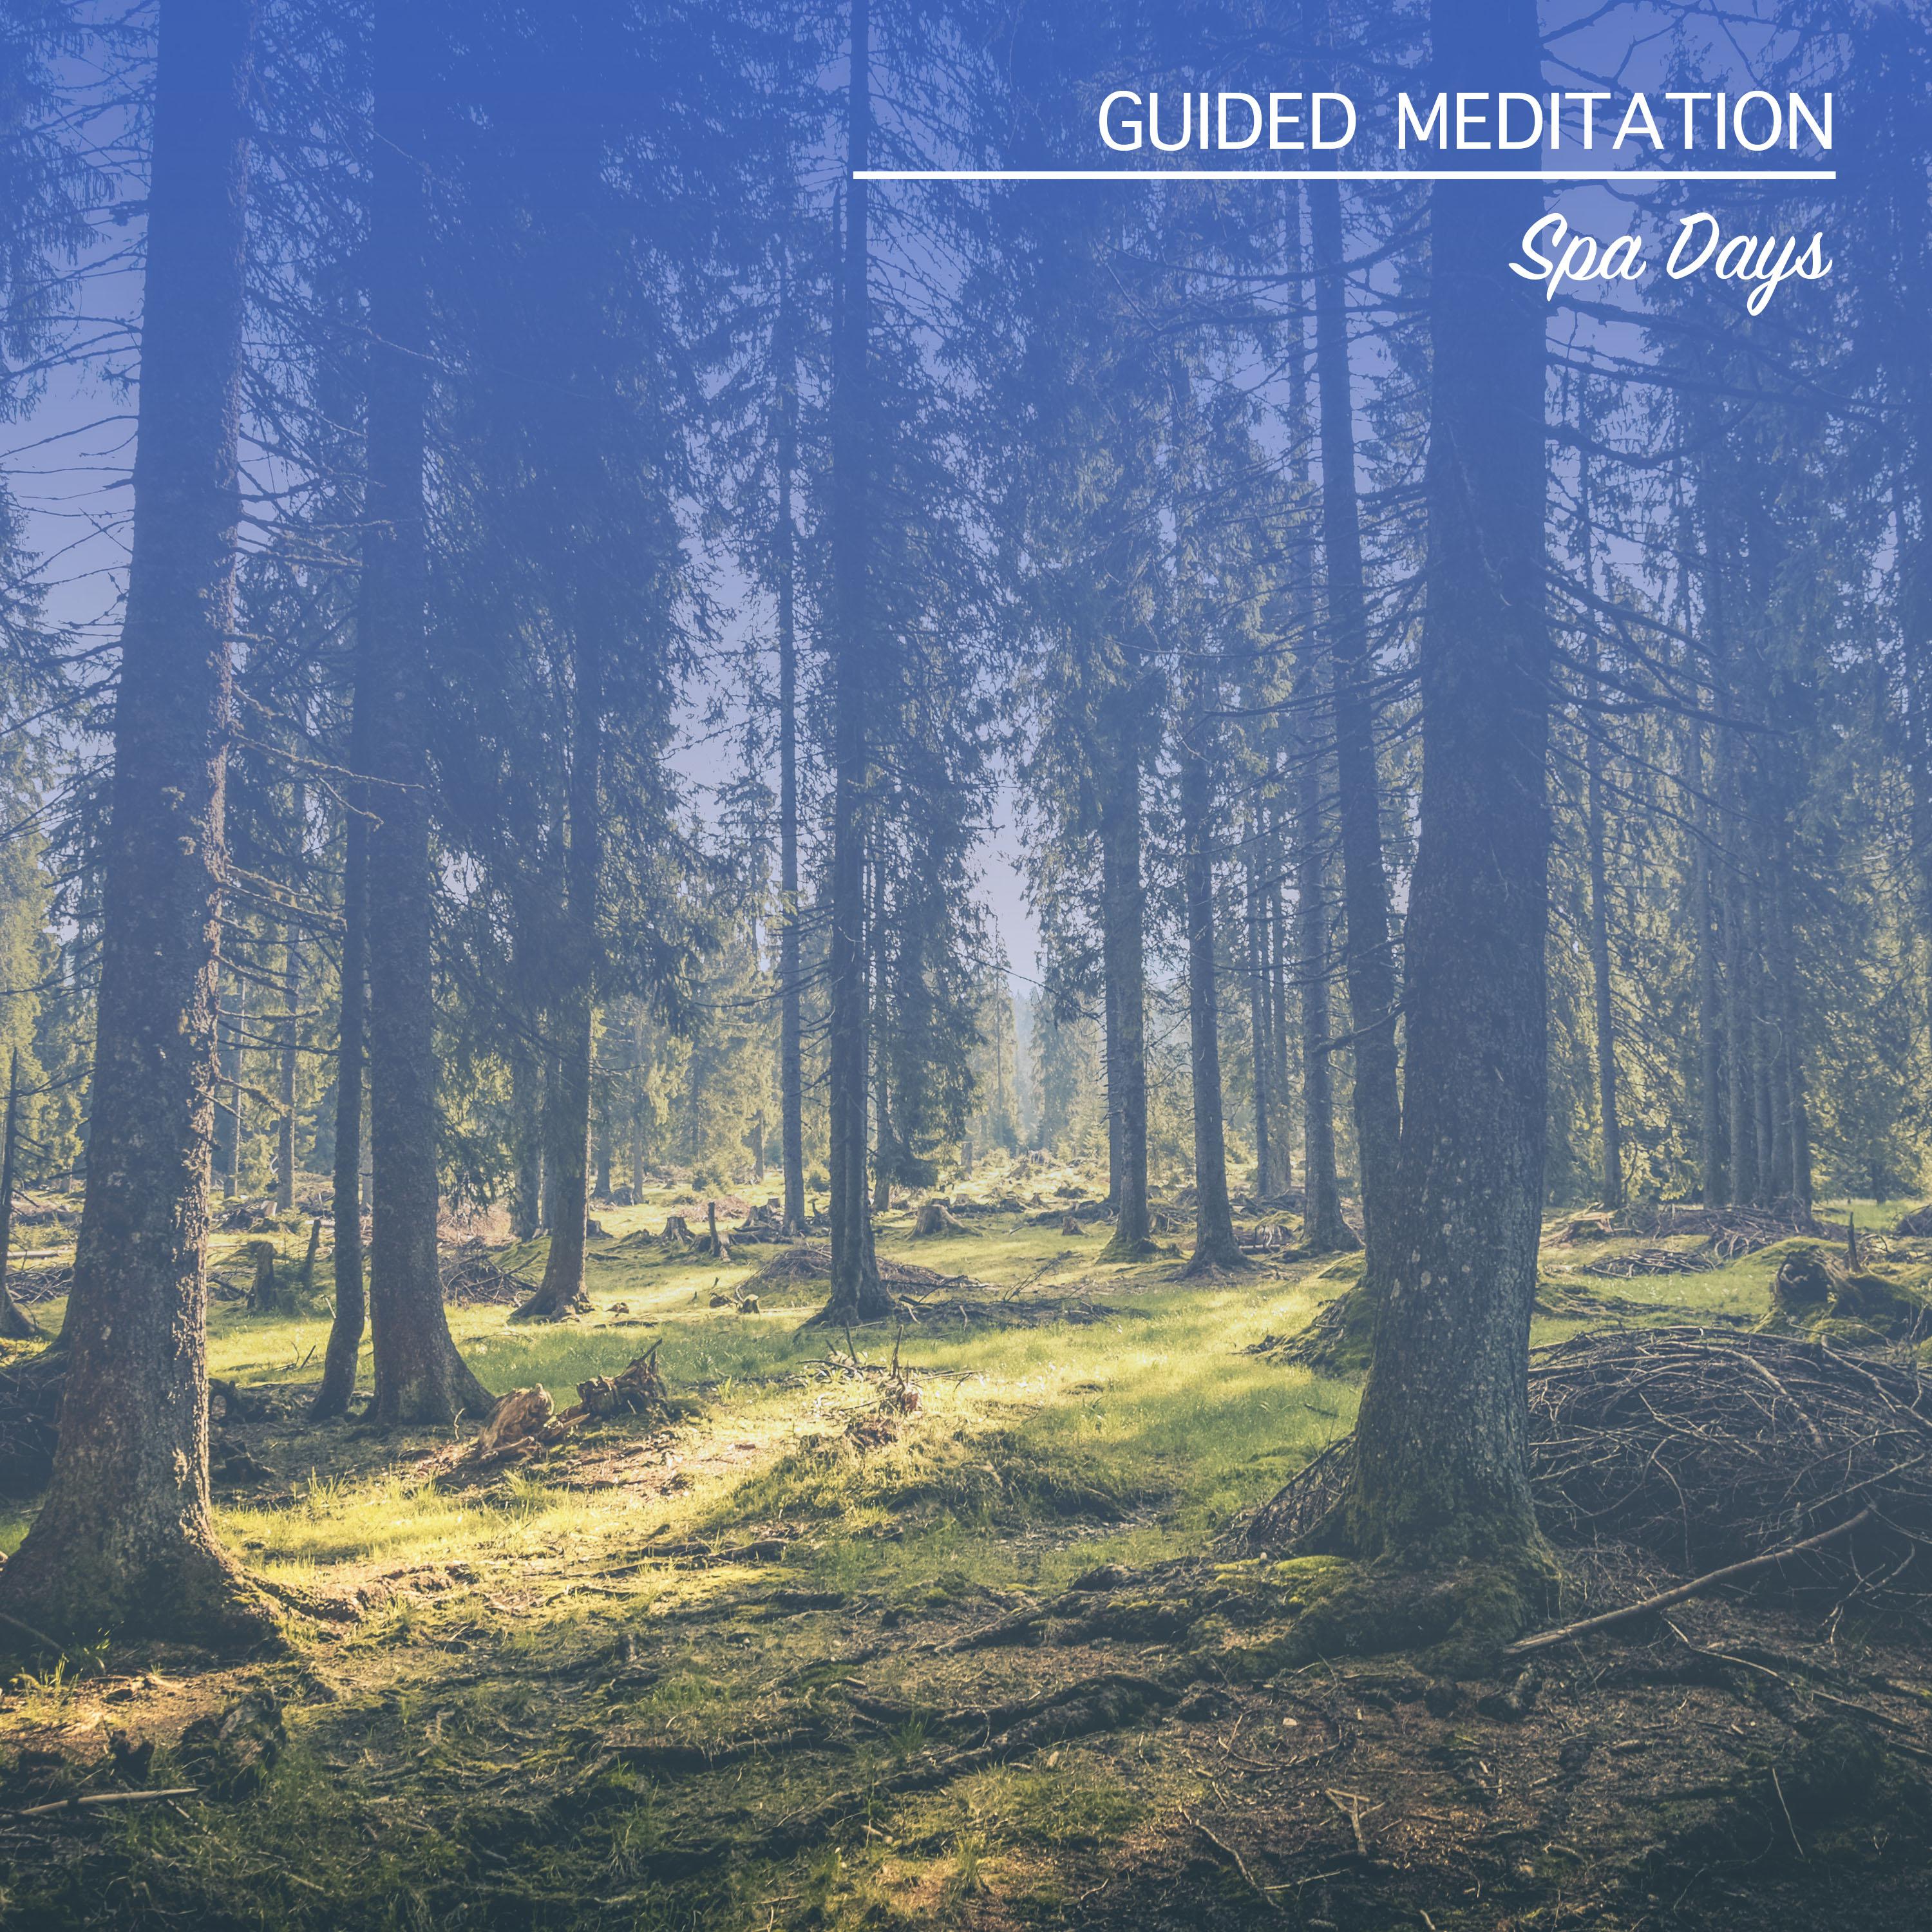 13 Idealic Songs for Guided Meditation and Spa Days